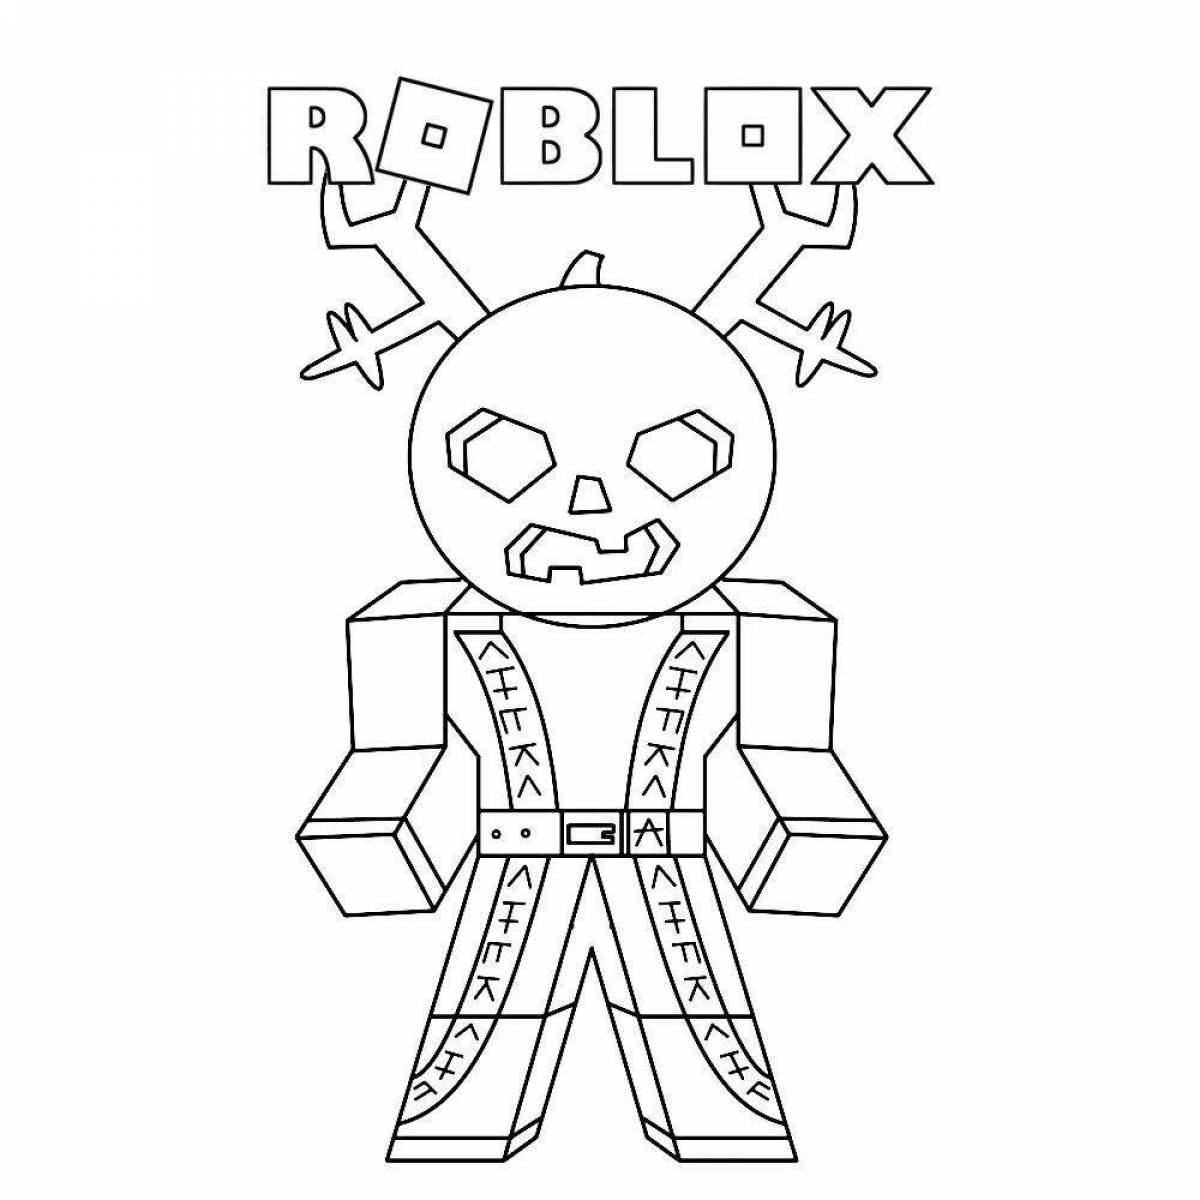 Playful roblox kp coloring page